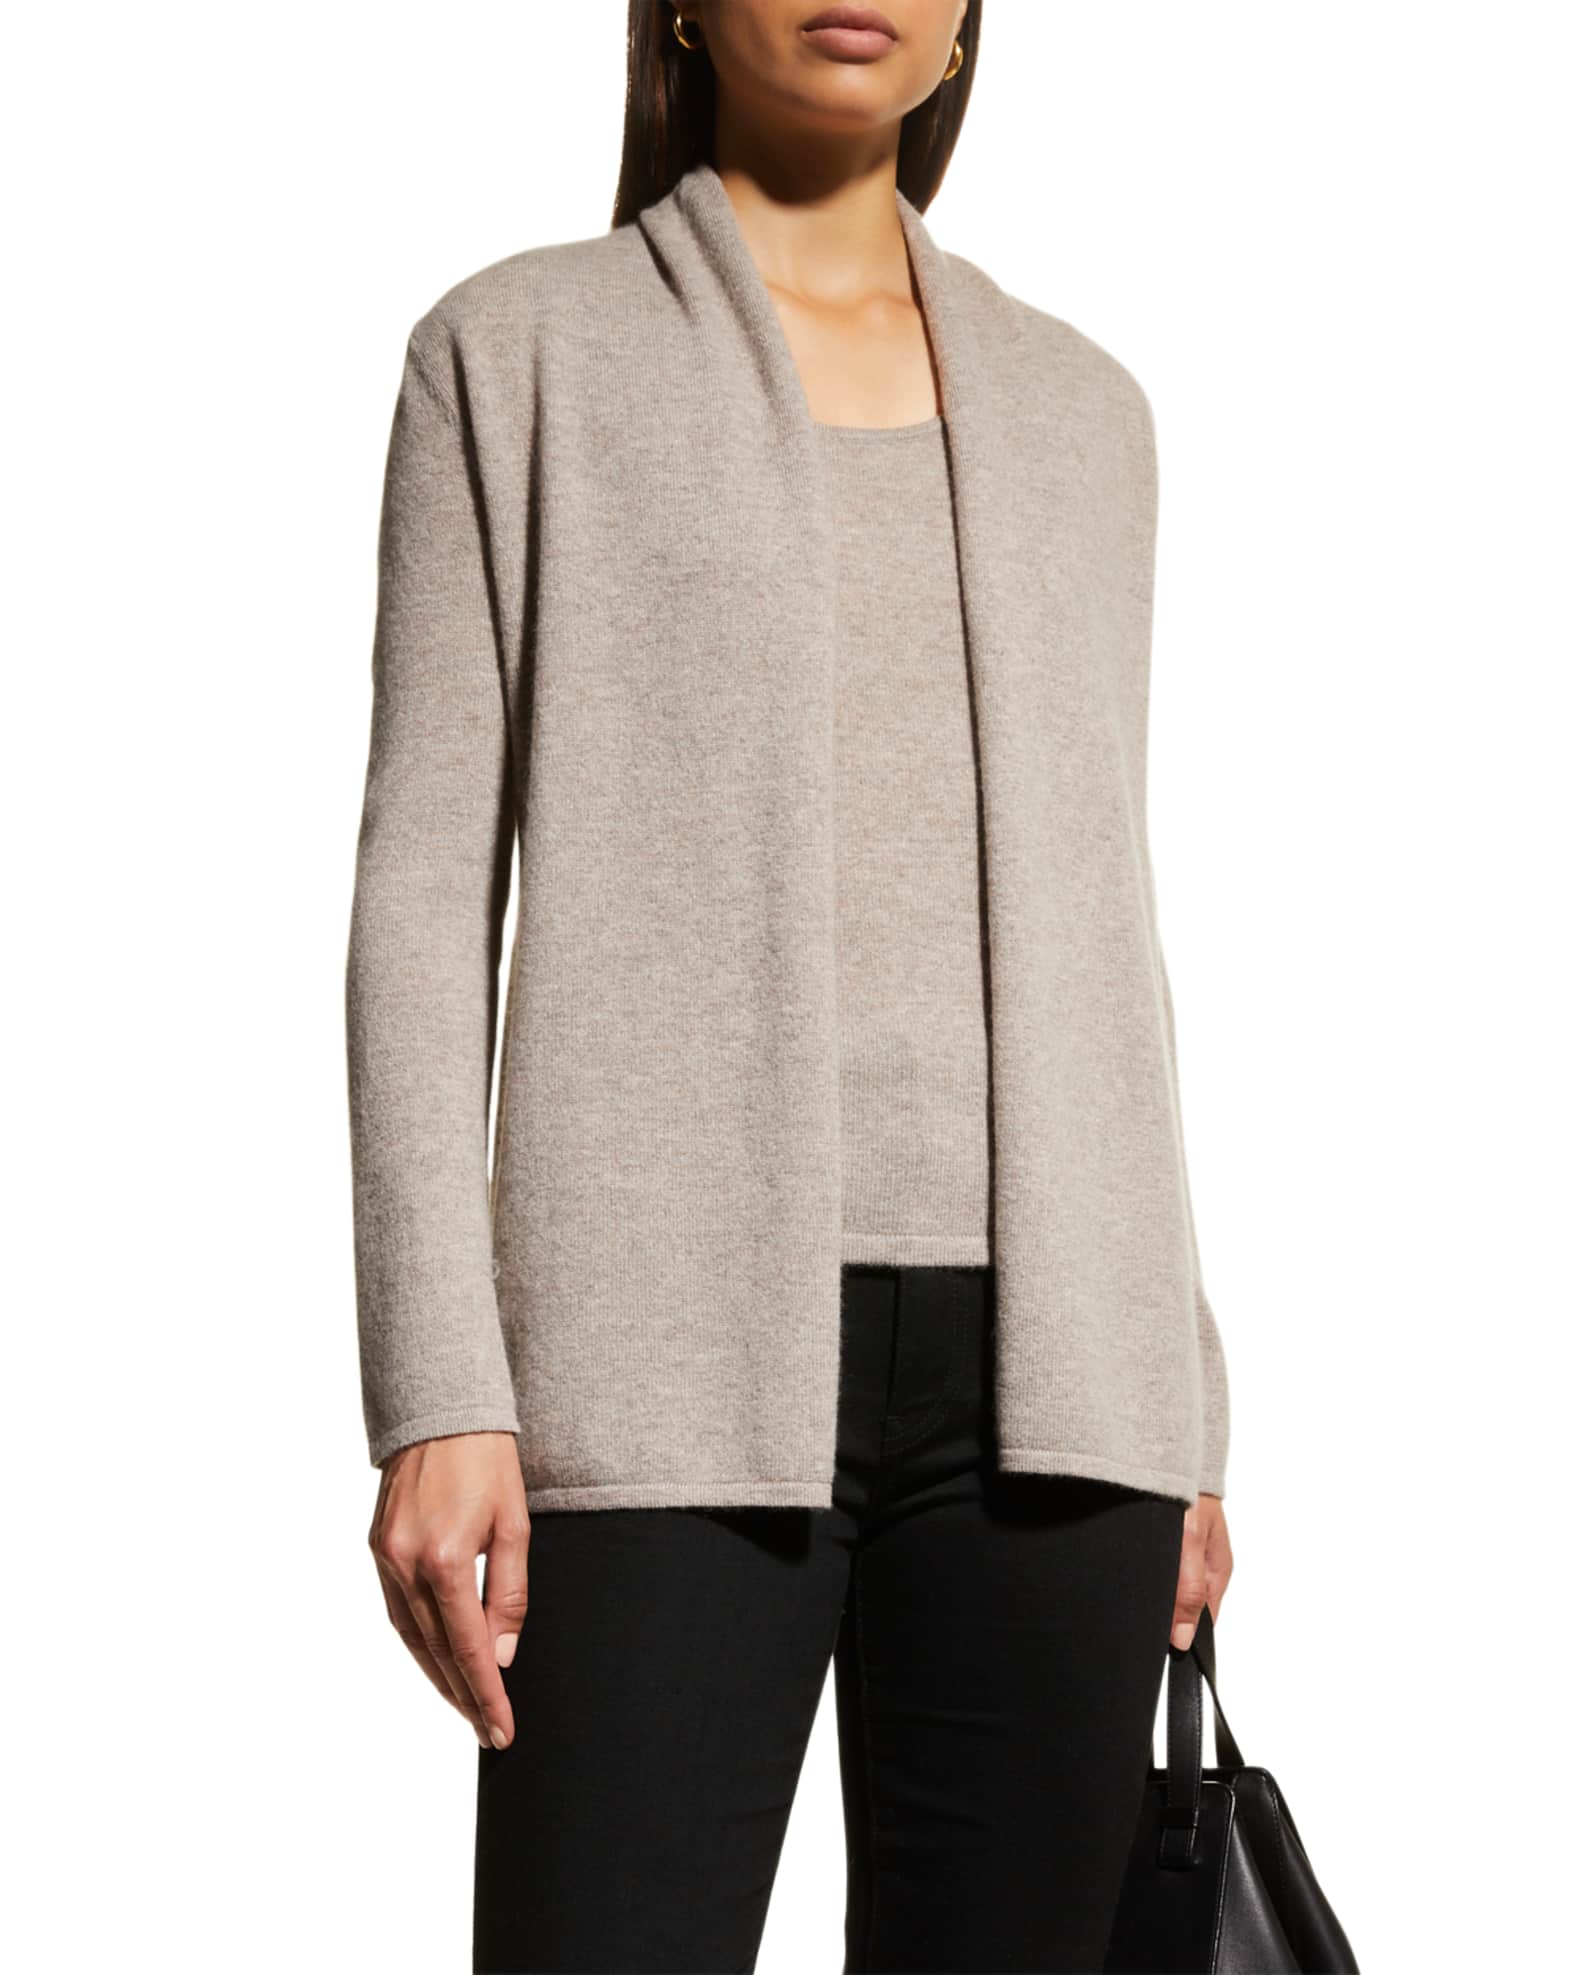 Neiman Marcus Cashmere Collection Open-Front Cashmere Cardigan | Neiman Marcus